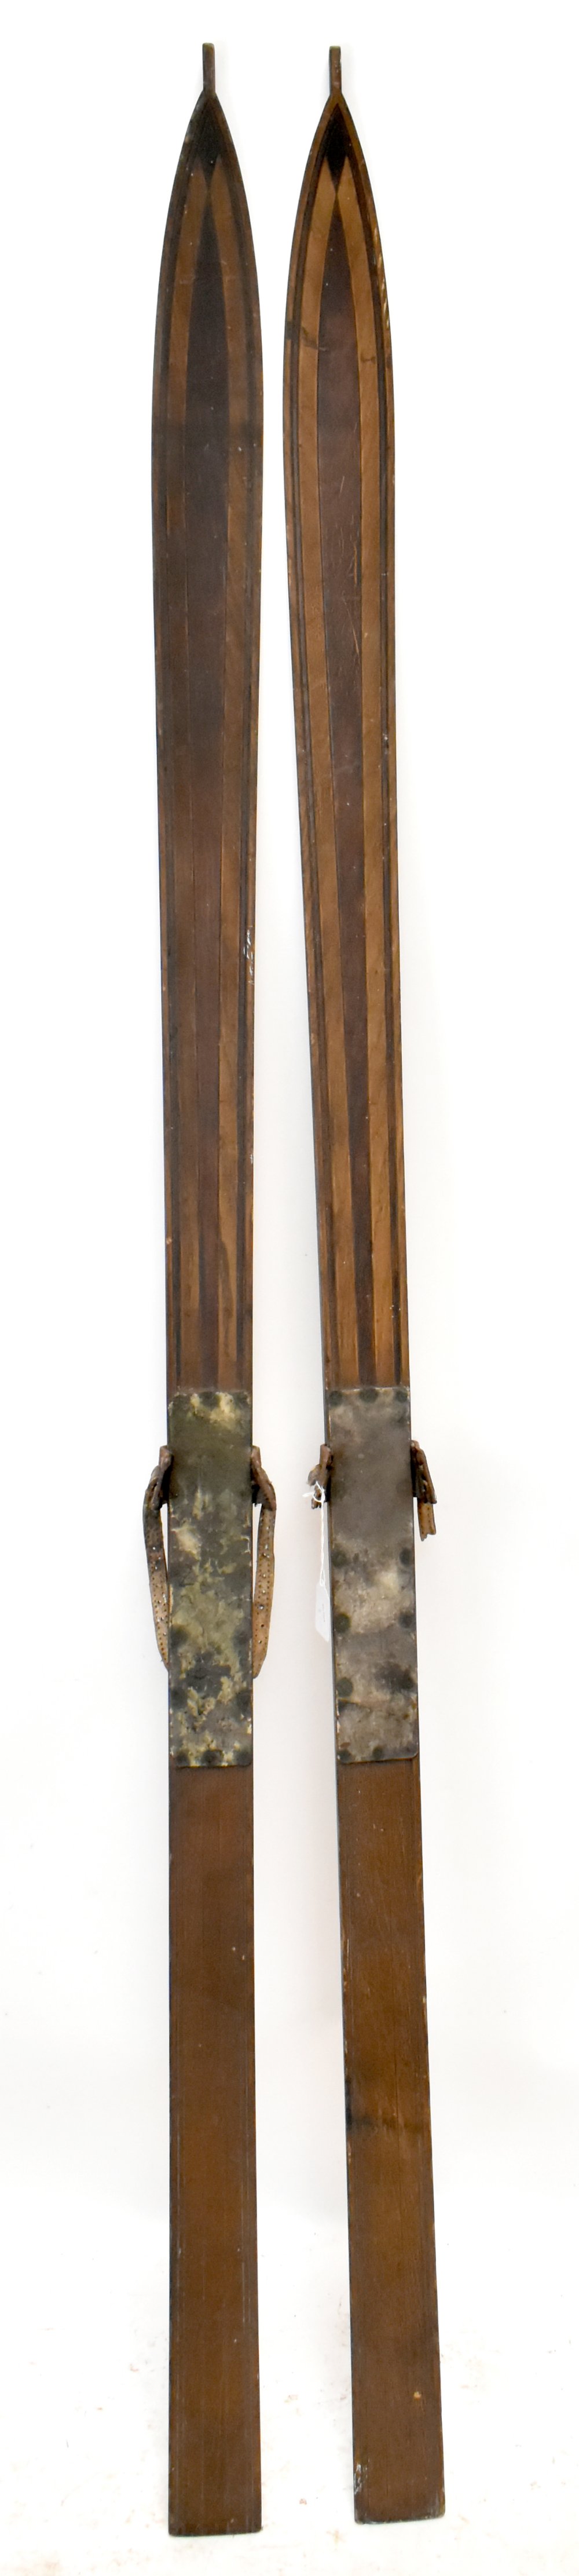 L.H HAGEN & CO CHRISTIANIA; a pair of hickory wood, steam bent, pre 1925 skis with Fritz Huitfeldt